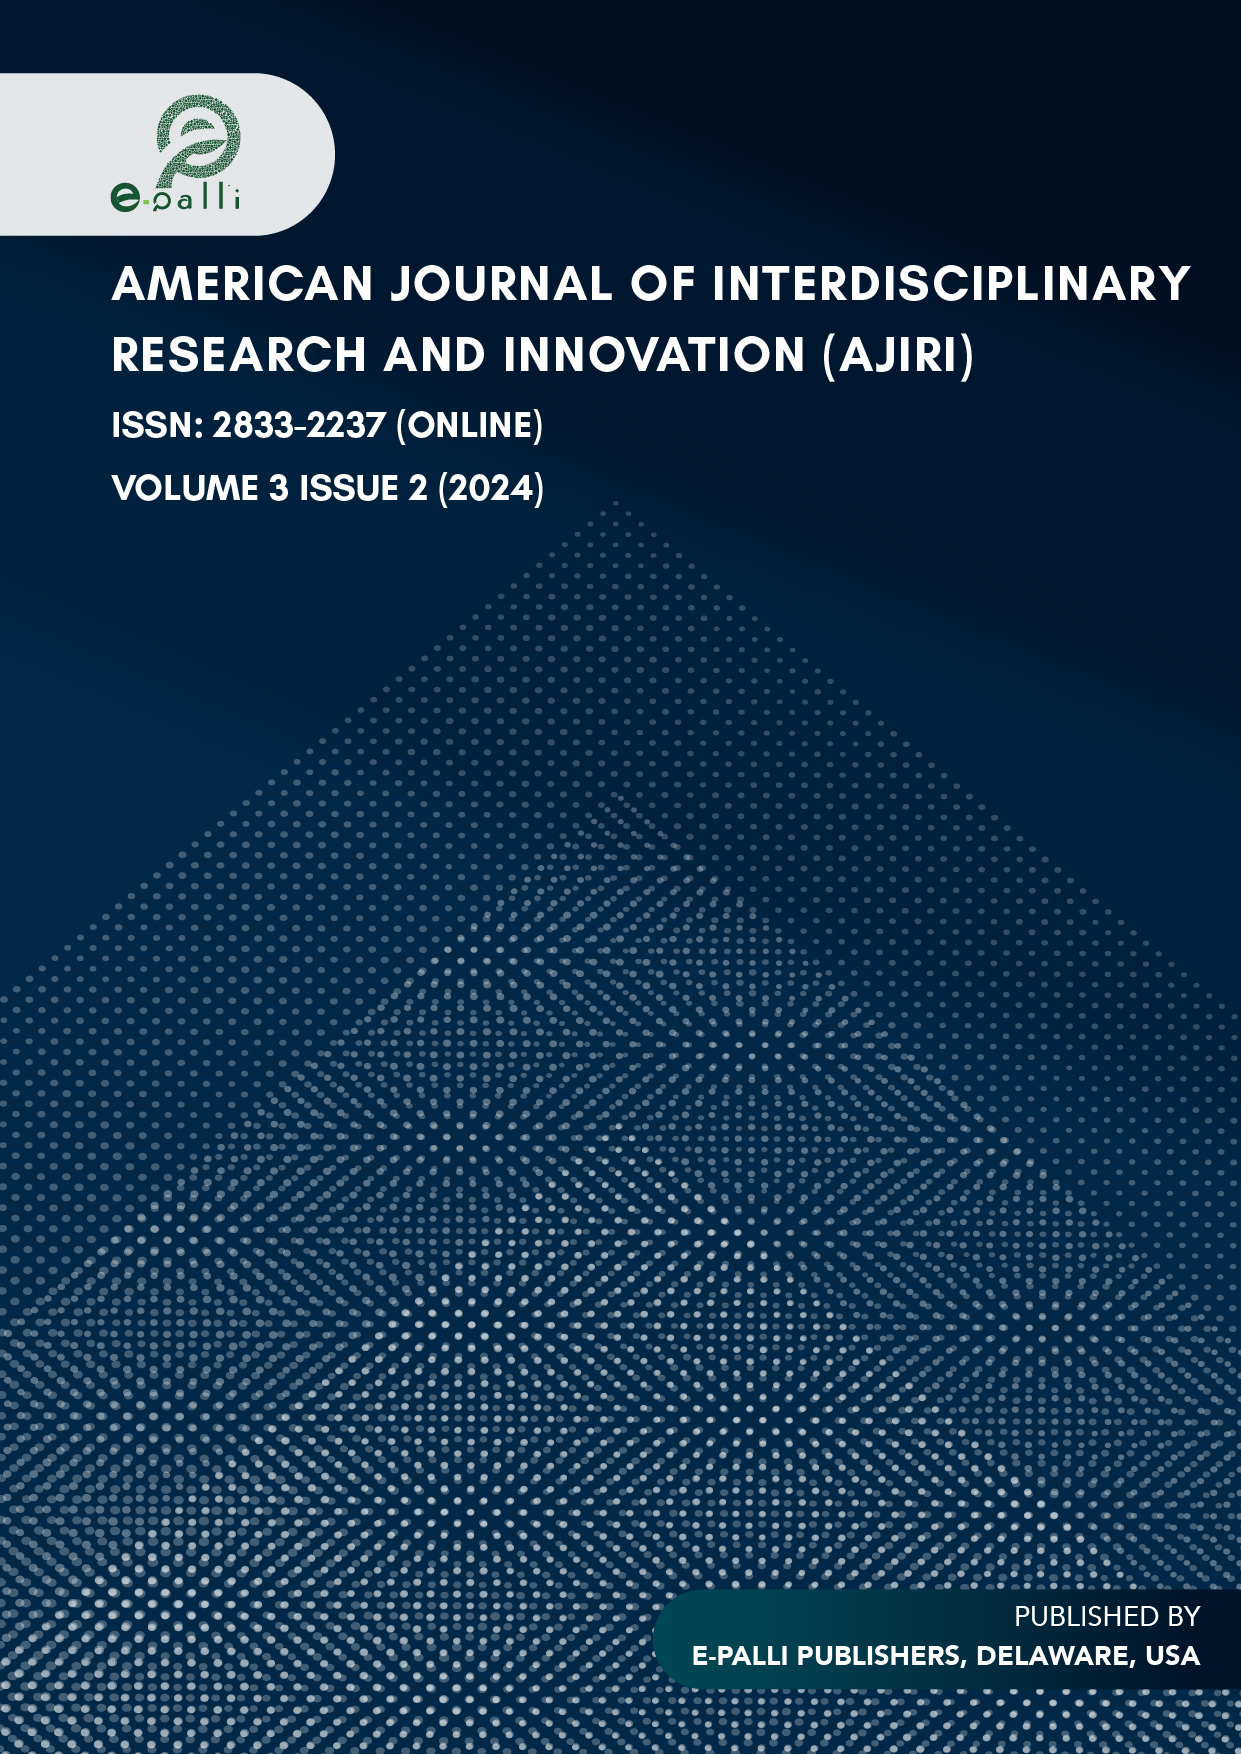 					View Vol. 3 No. 2 (2024): American Journal of Interdisciplinary Research and Innovation
				